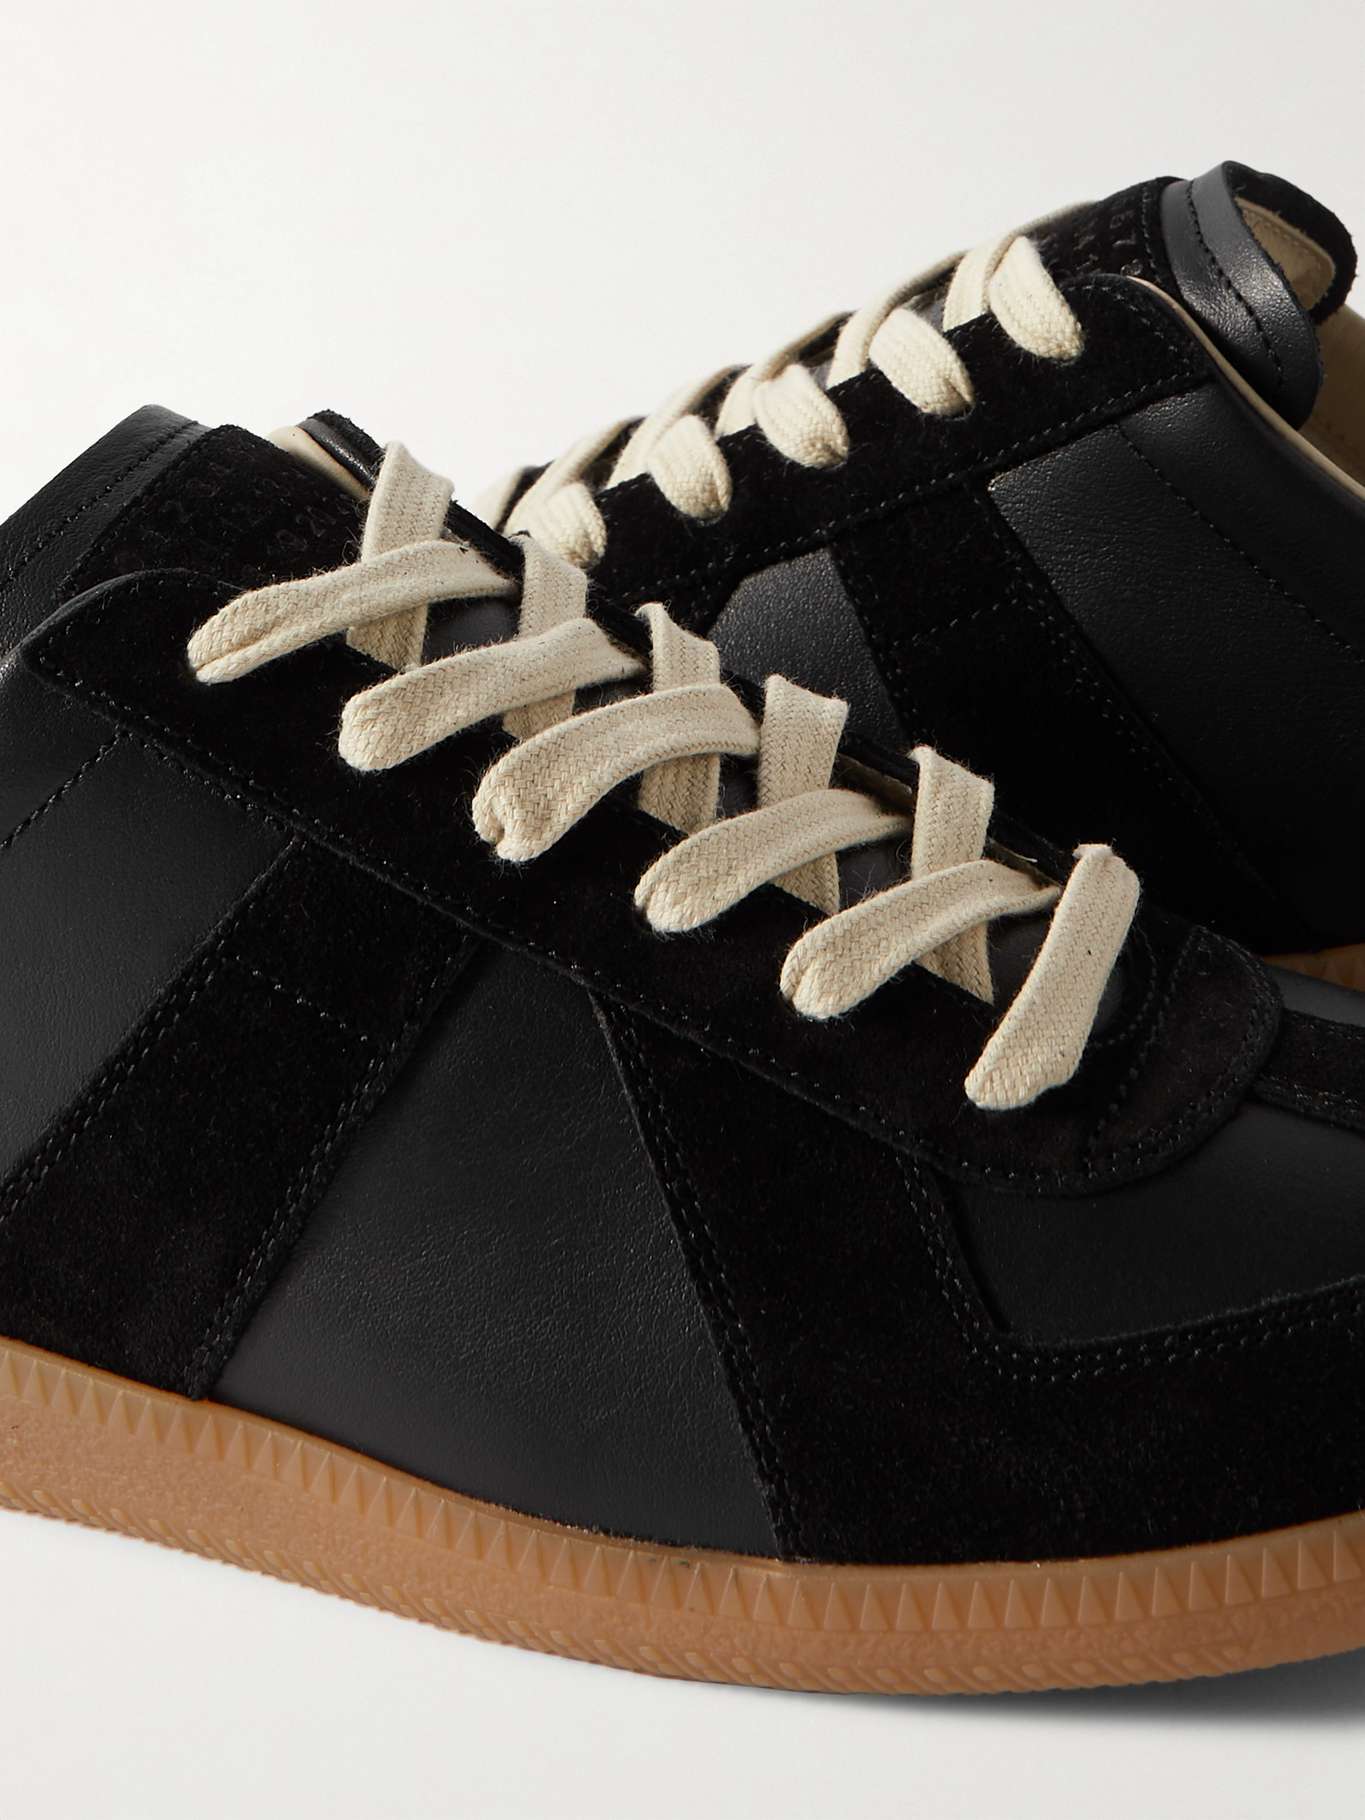 MAISON MARGIELA Replica Leather and Suede Sneakers | MR PORTER